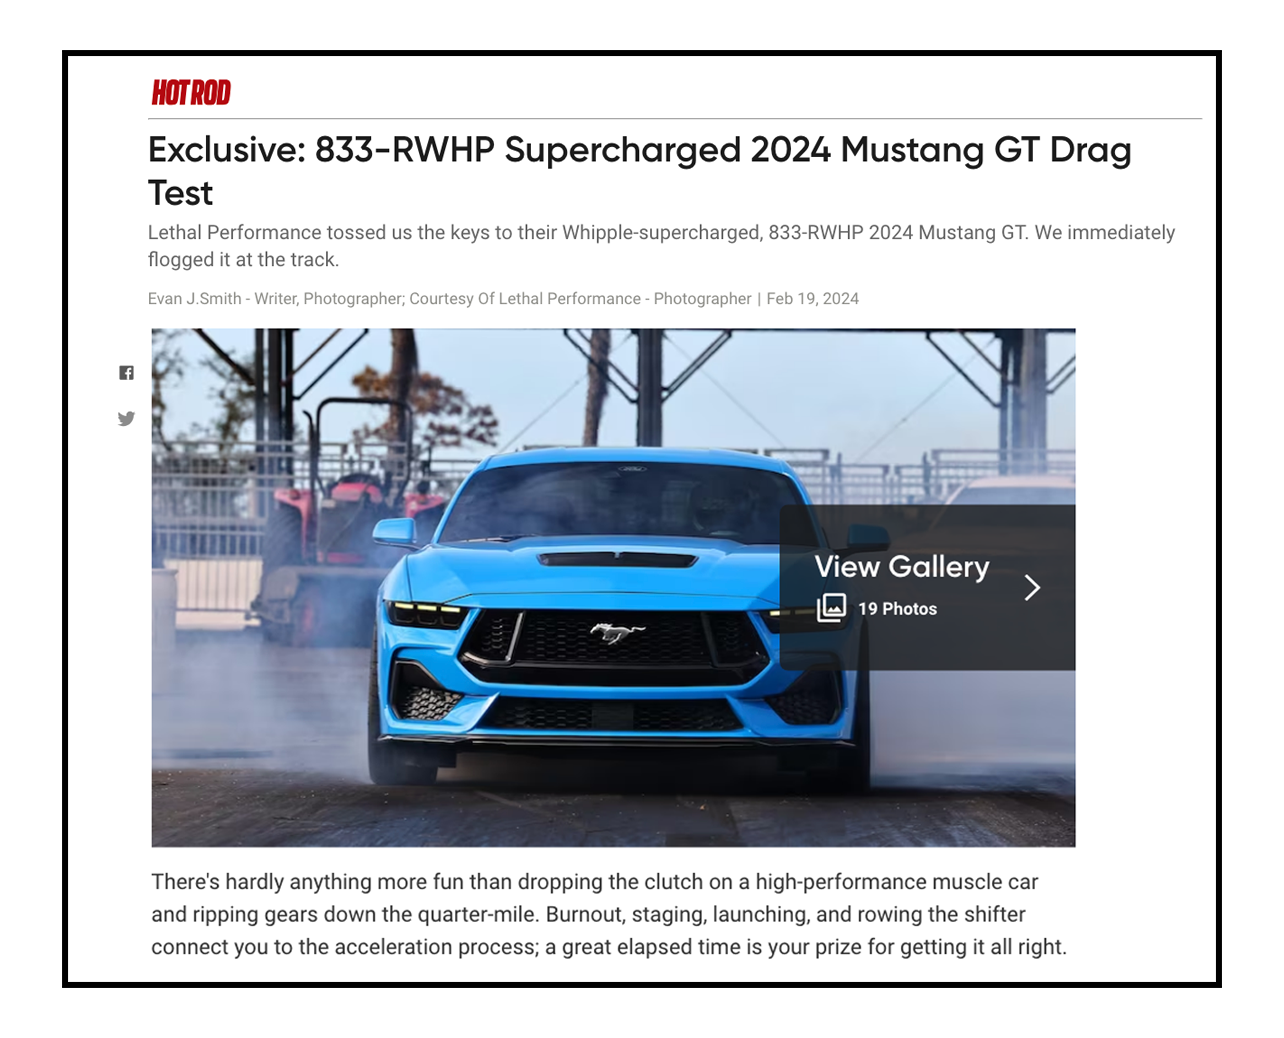 Hot Rod Magazine Article on our 2024 Mustang GT